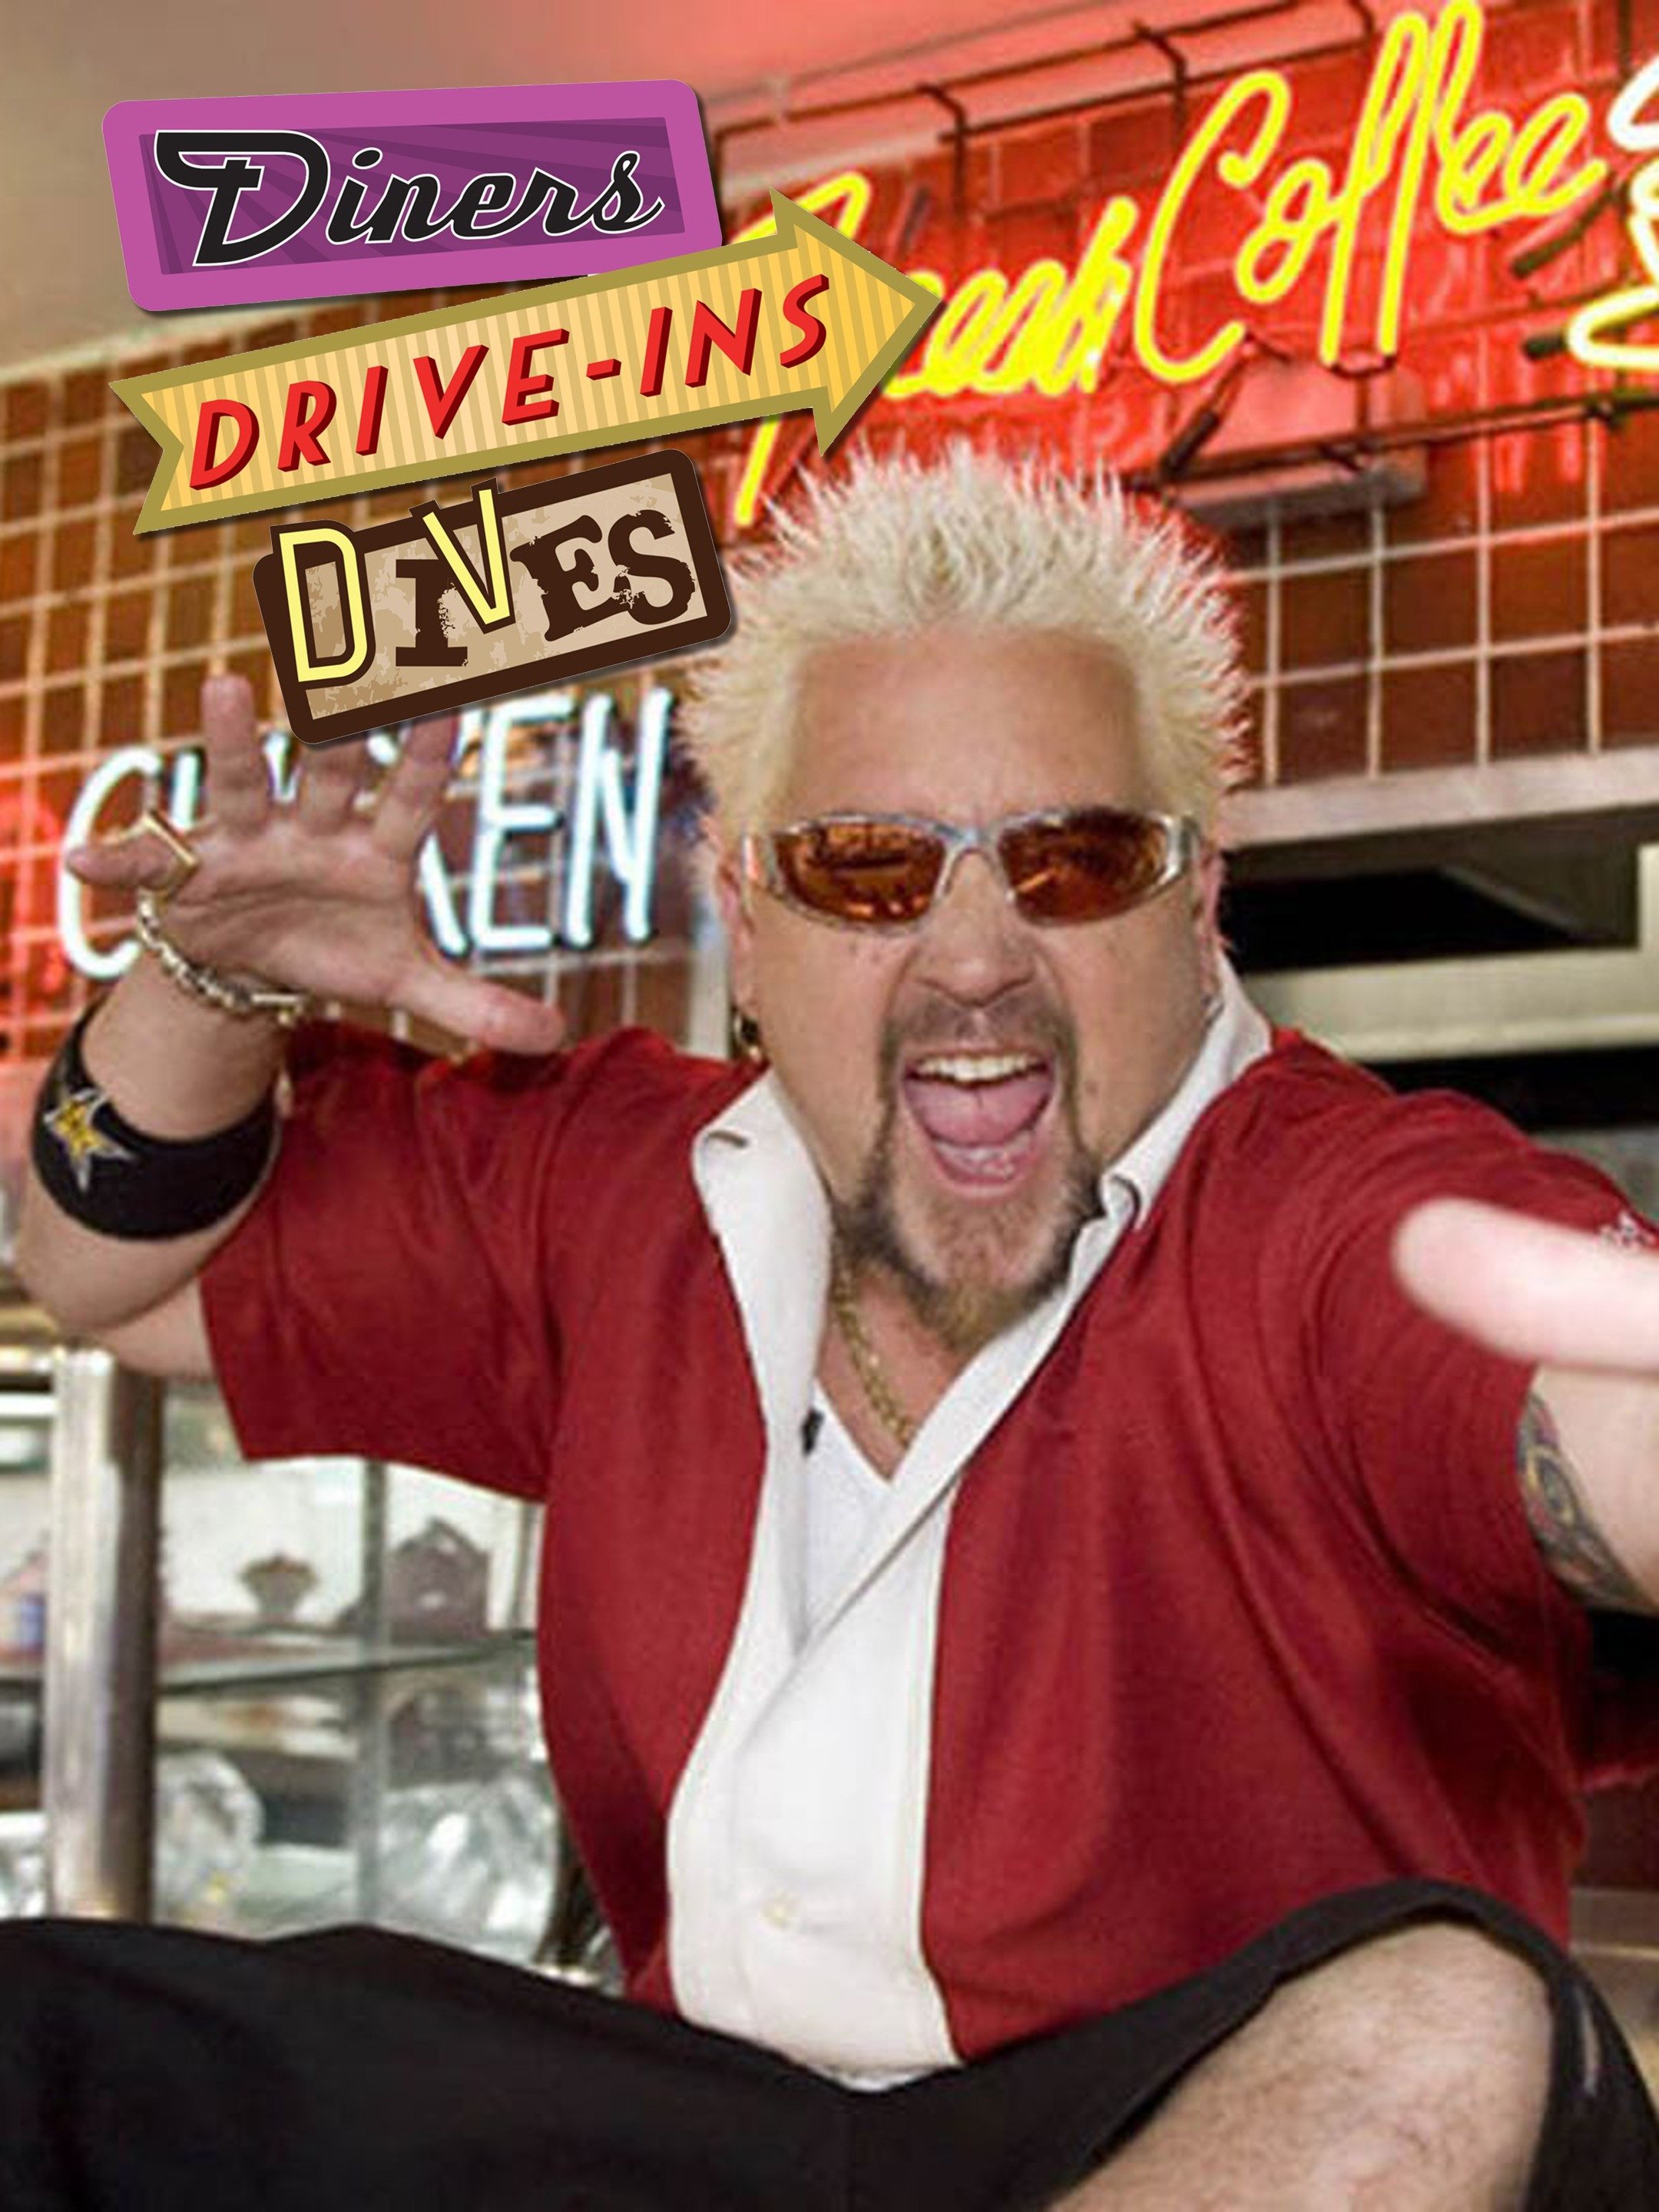 Diners, Drive-Ins and Dives: Season 1 pictures and photo gallery -- Check o...